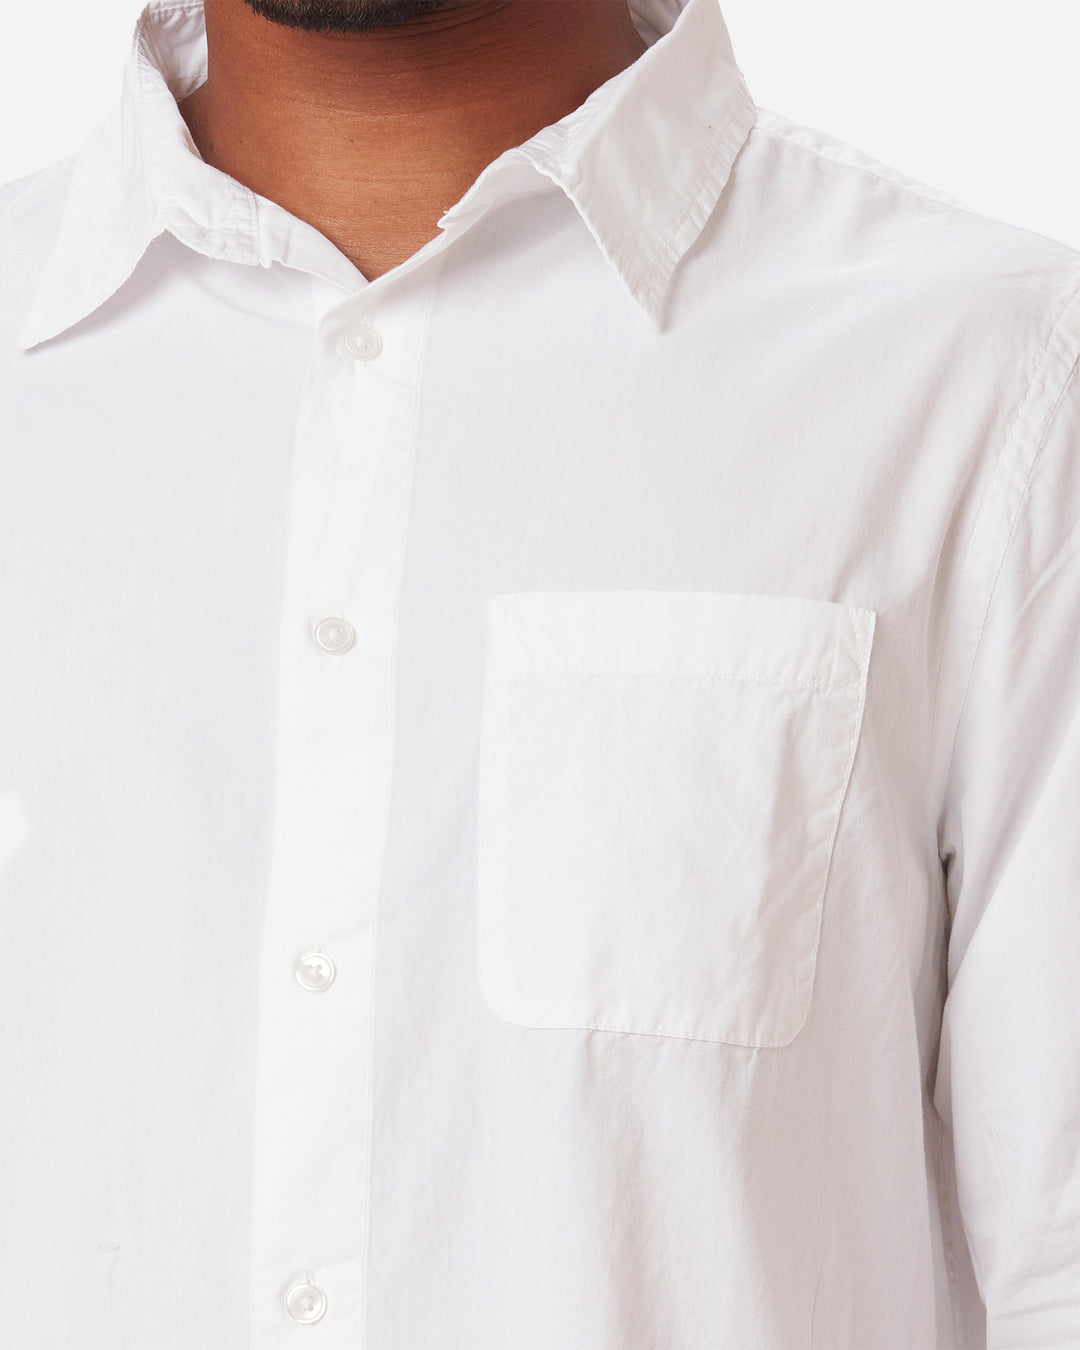 detail of breast pocket, neck, and collar on model wearing men's white long sleeve tailored poplin shirt with color matched buttons and a single pocket in standard height option